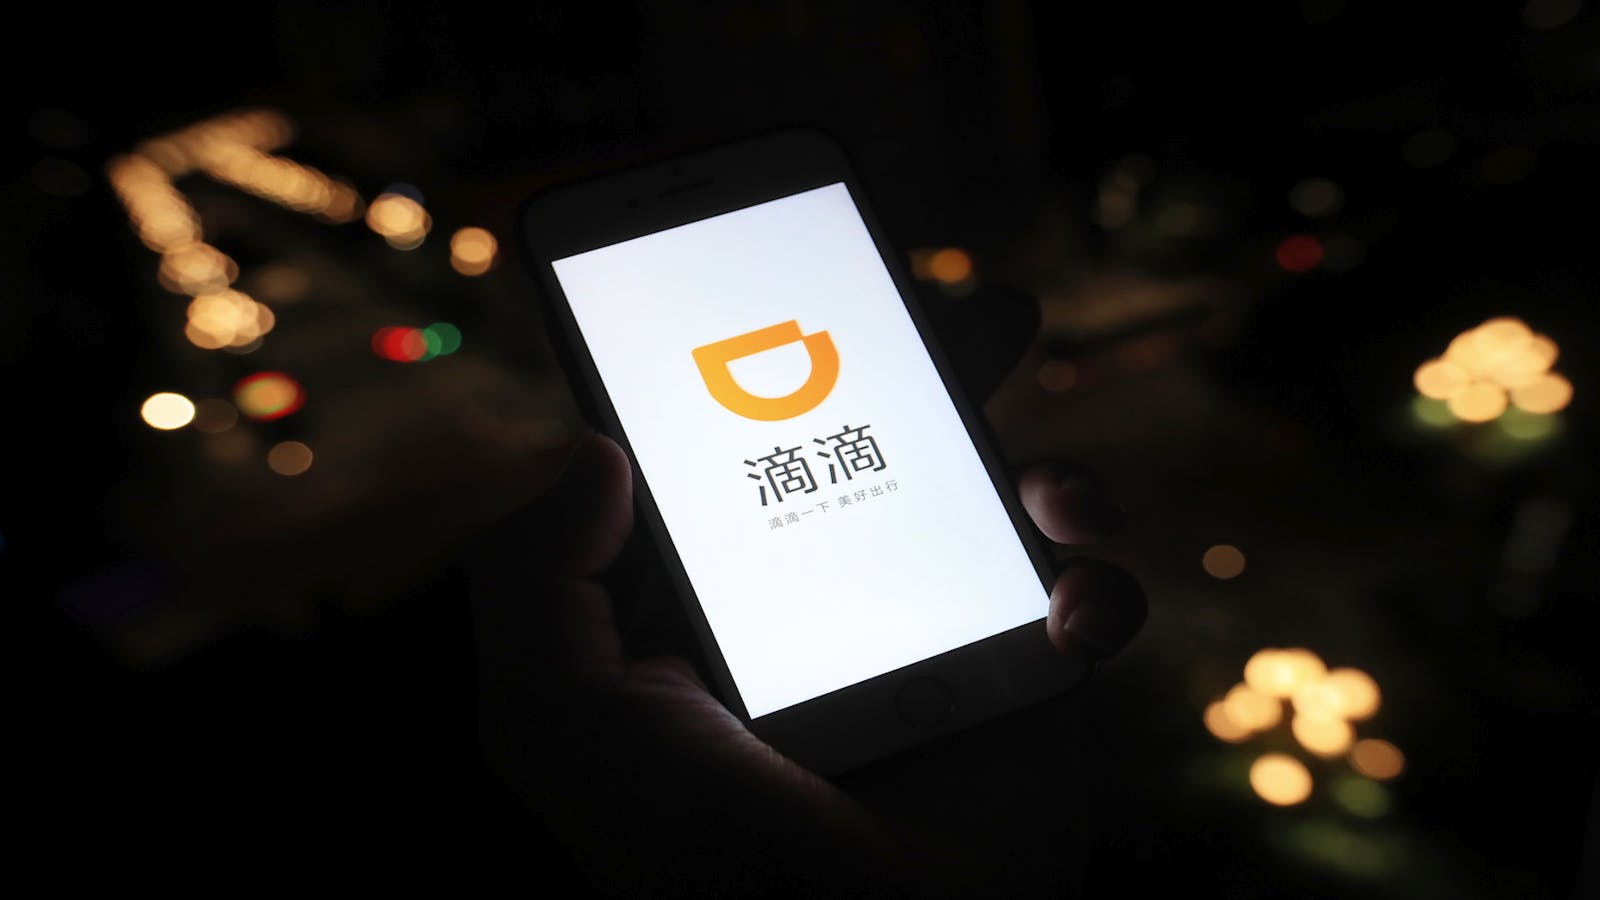 Smartphone app Didi Chuxing. Photo by Imaginechina via AP Images.